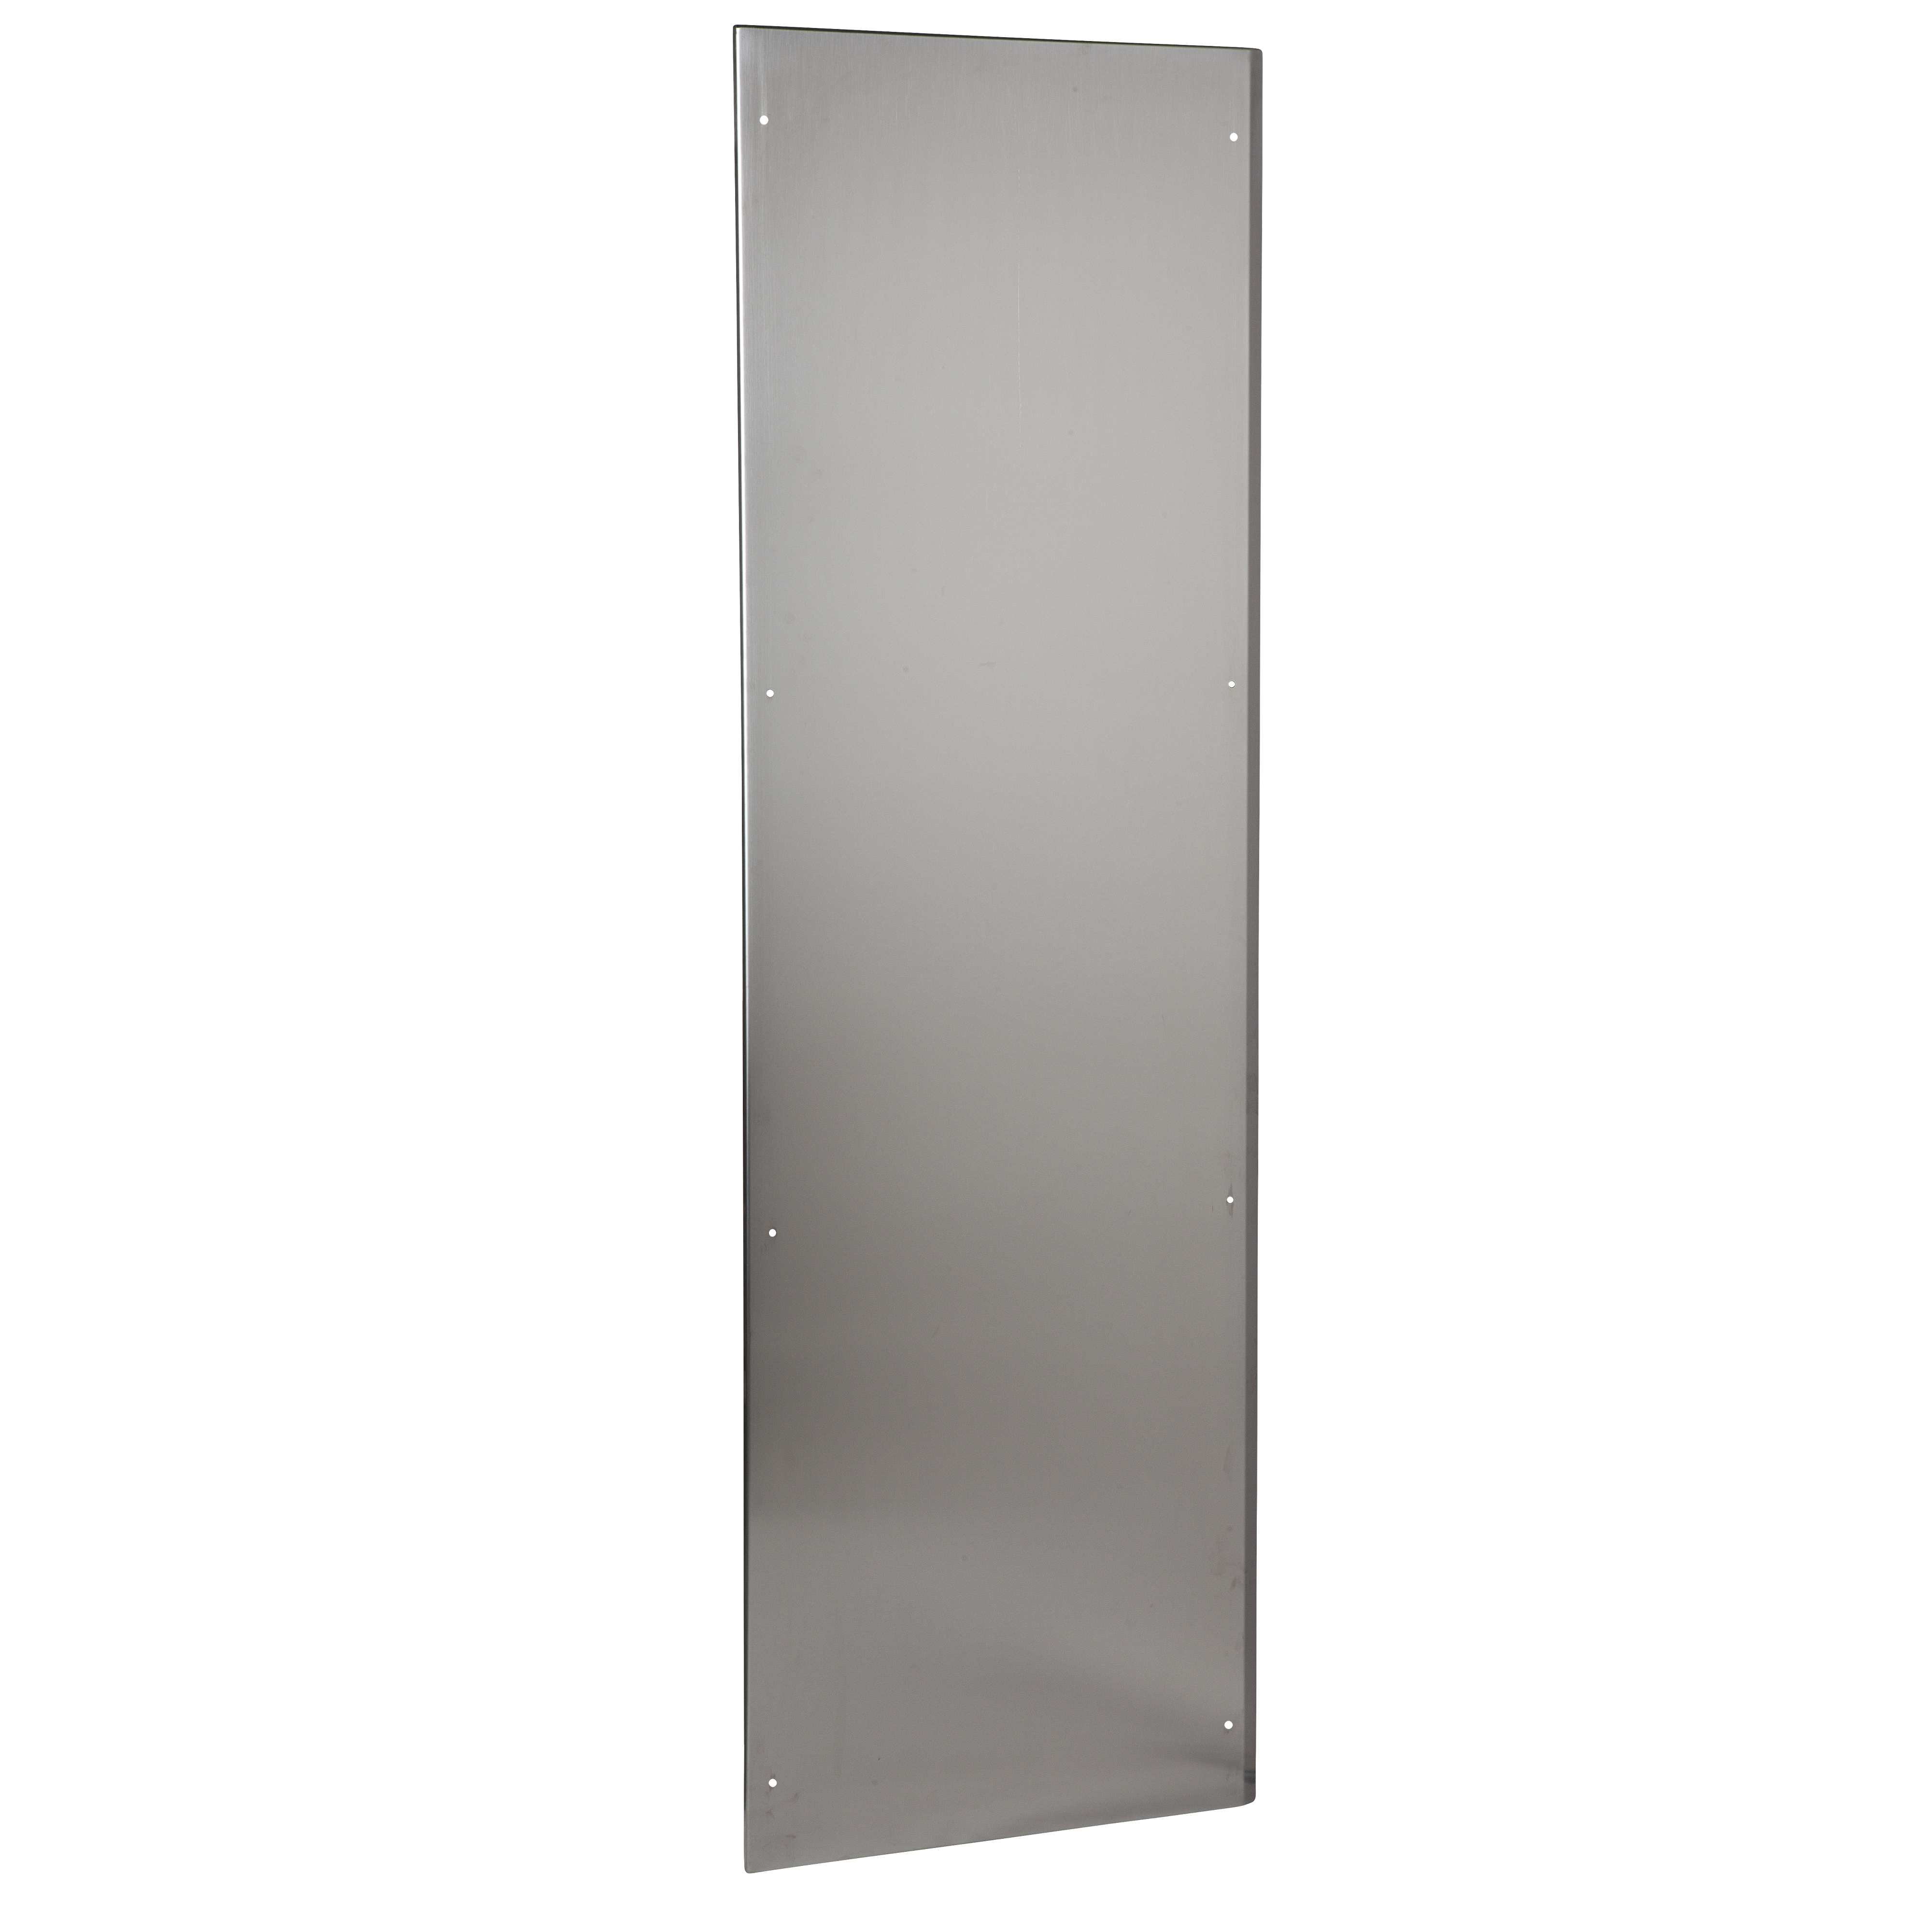 2 side panels stainless 304L, Scotch BriteÂ® finish, for SFX H2000xD500mm